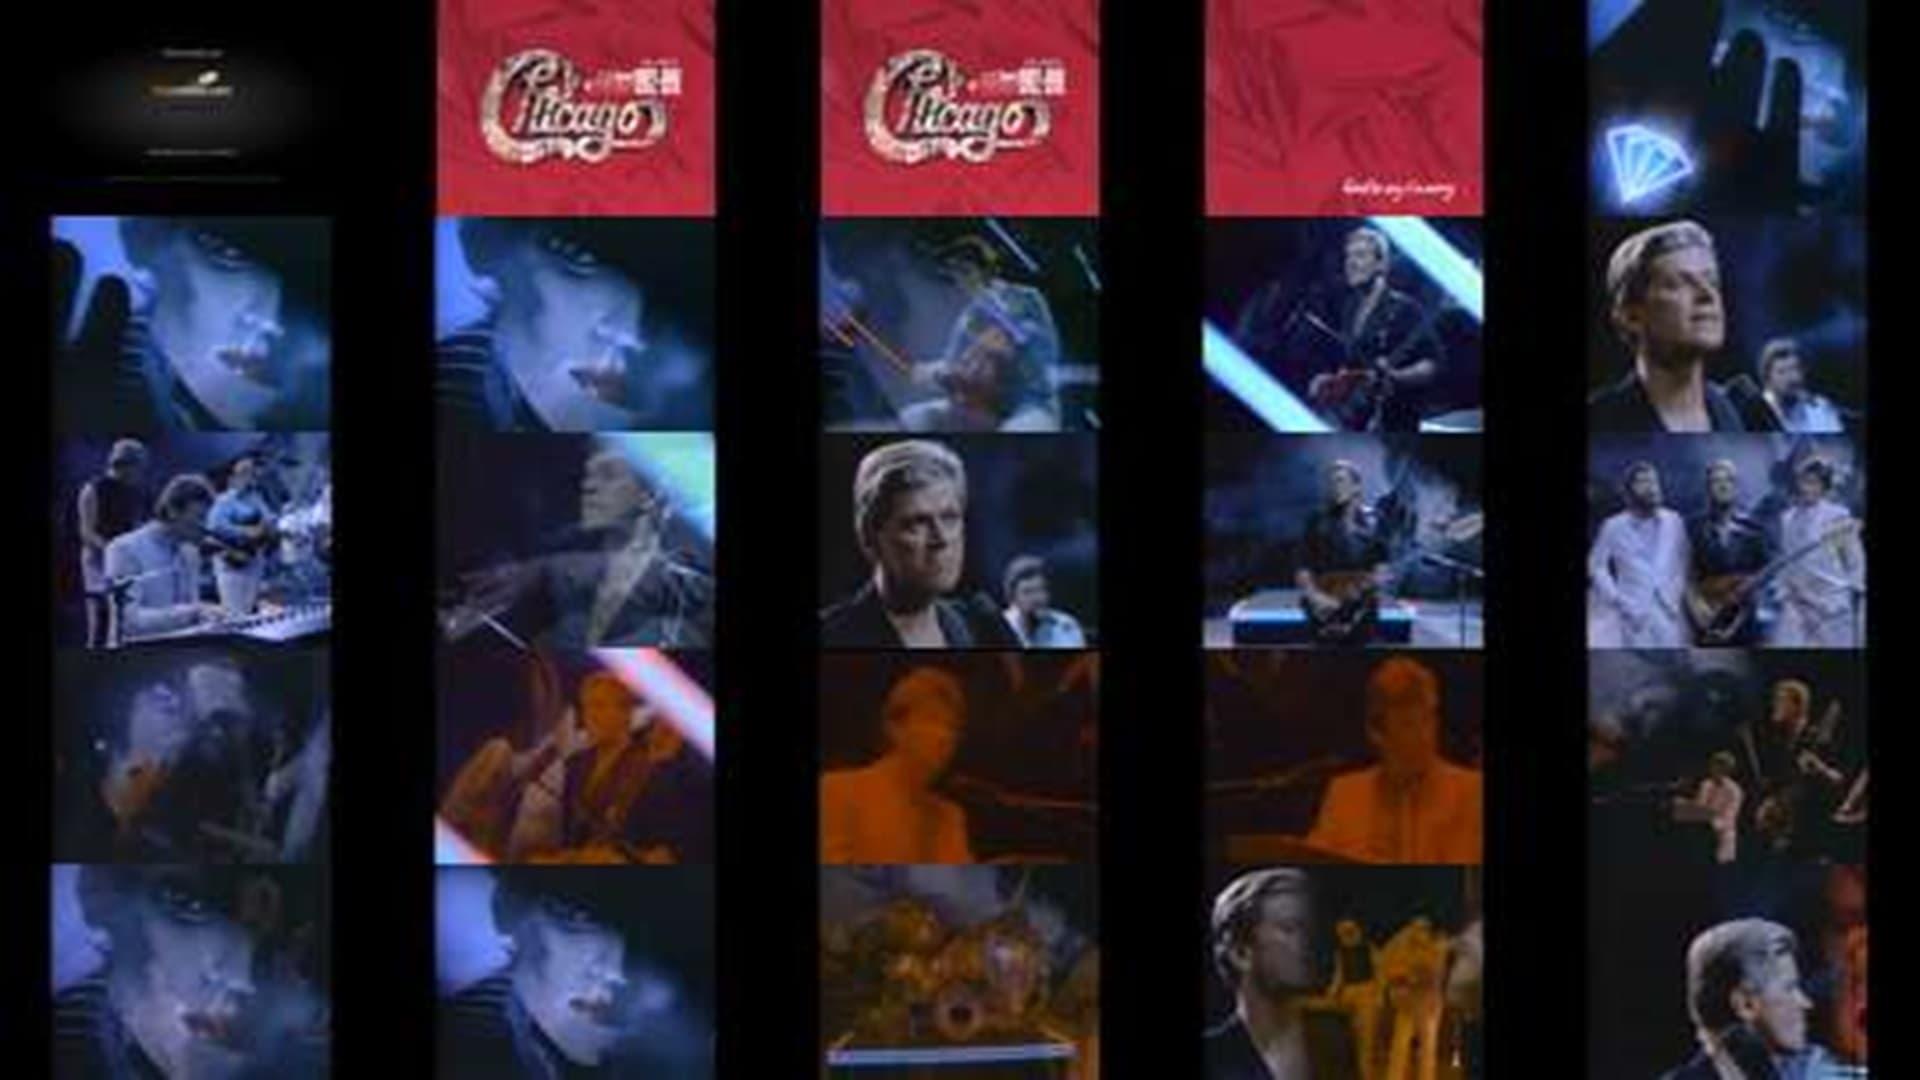 Chicago - The Heart of Chicago The Video (1982-1991) backdrop